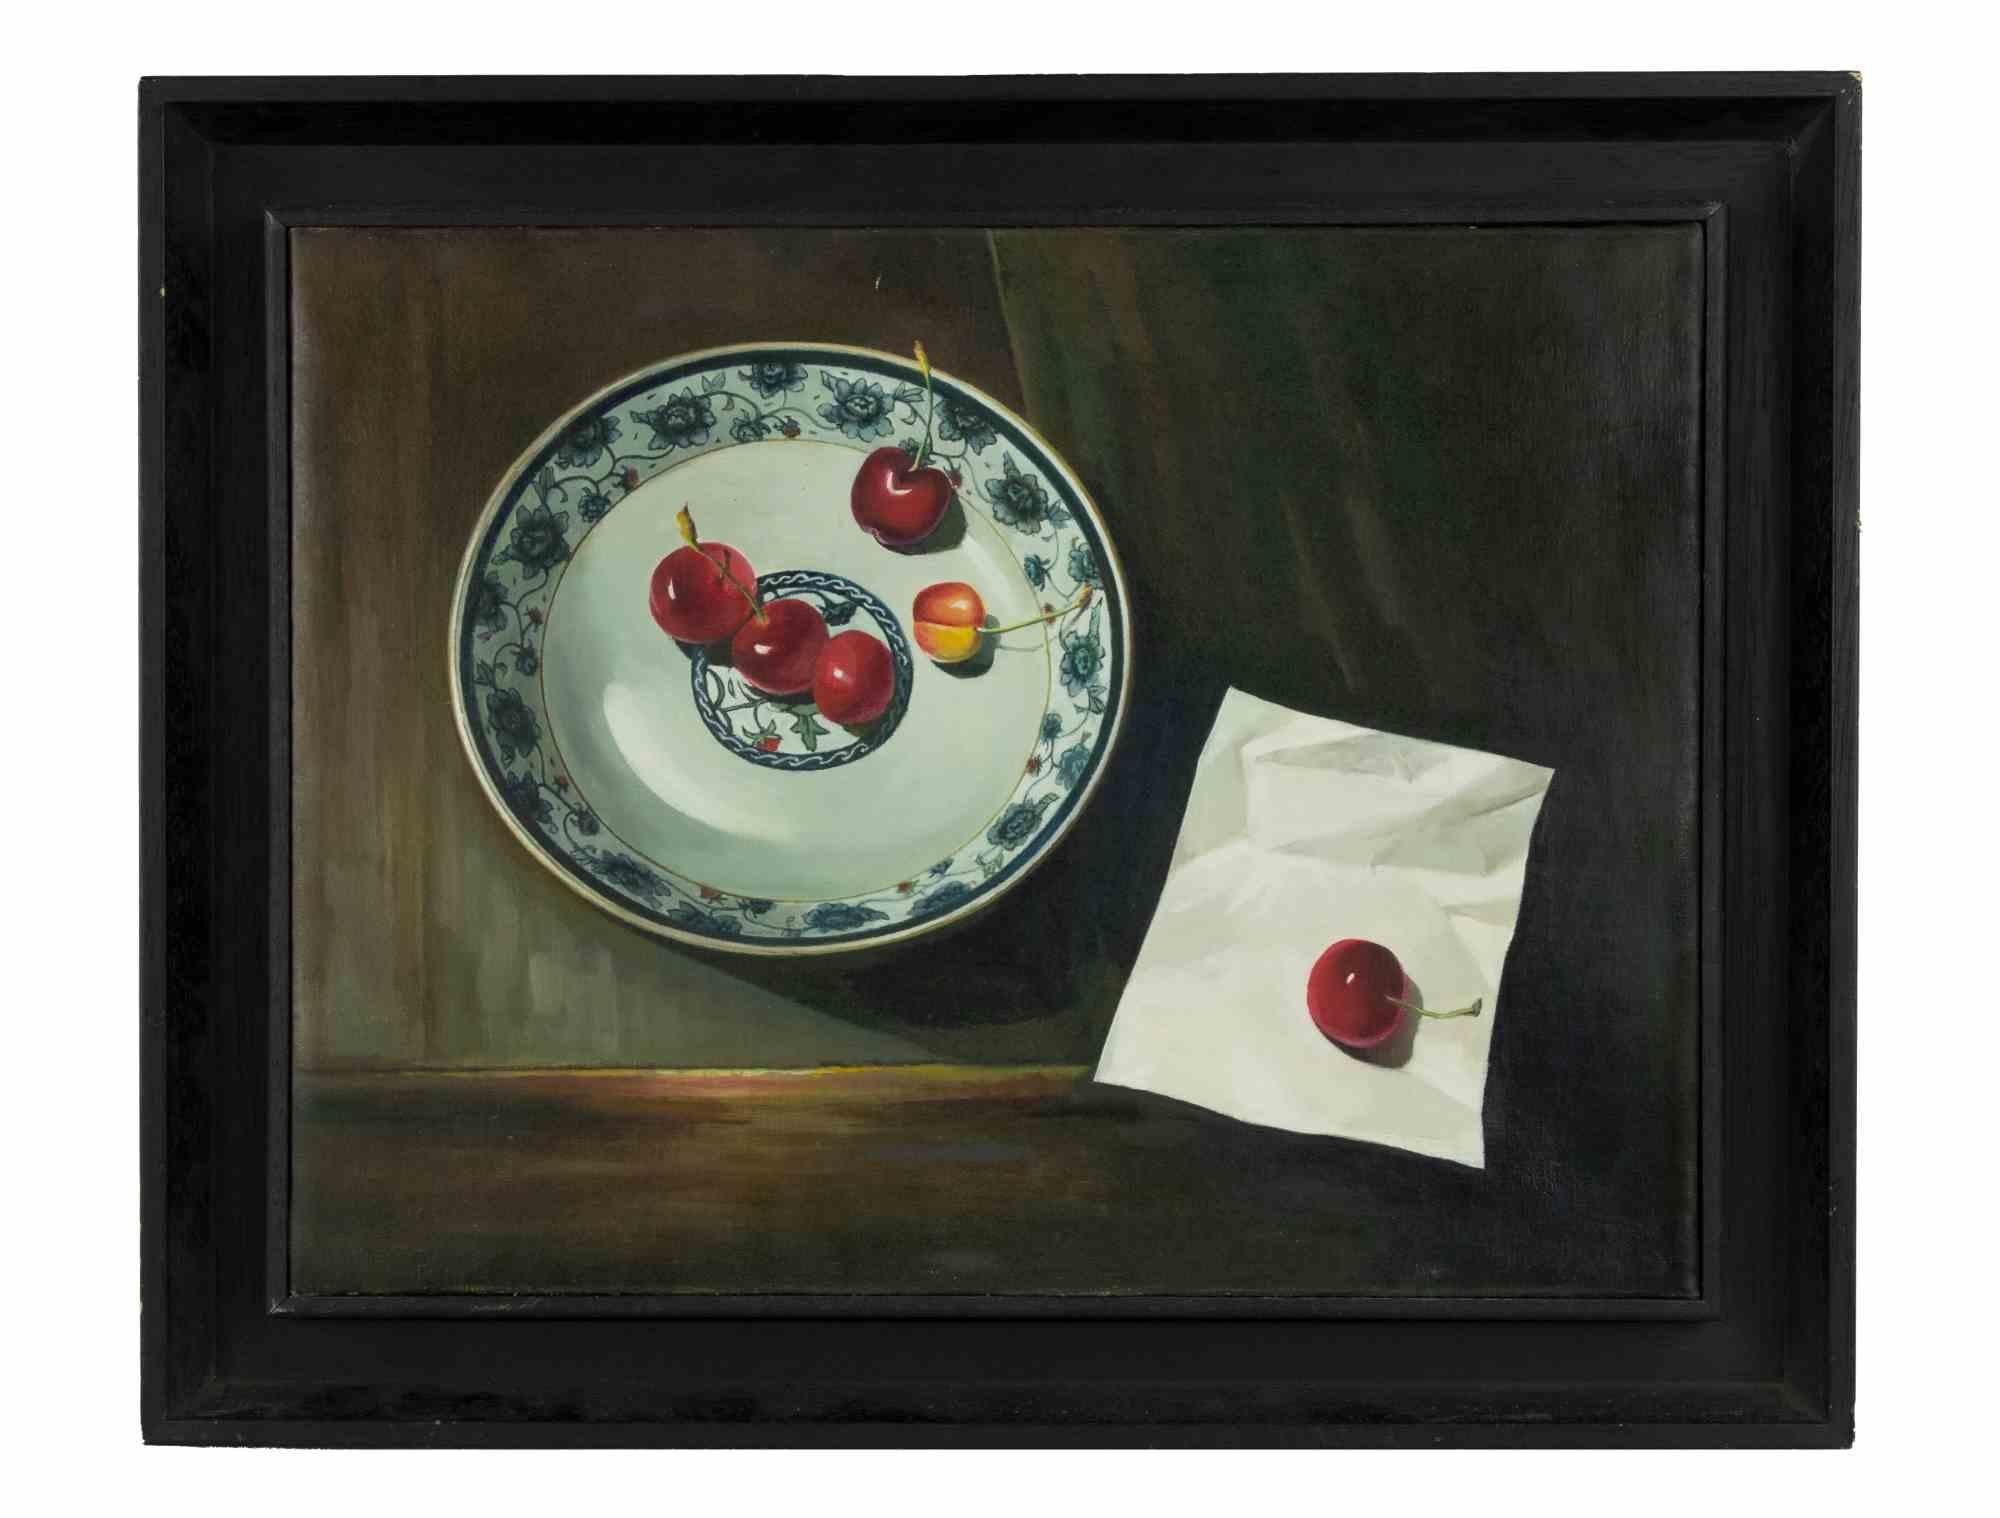 Still life with cherries is an original oil painting realized  by Zhang Wei Guang (Mirror) in 2000s.

Includes frame.

Very Good conditions.

Zhang Wei Guang , also called ‘mirror' was born in Helong Jang, China in 1968. Having made a deep formative